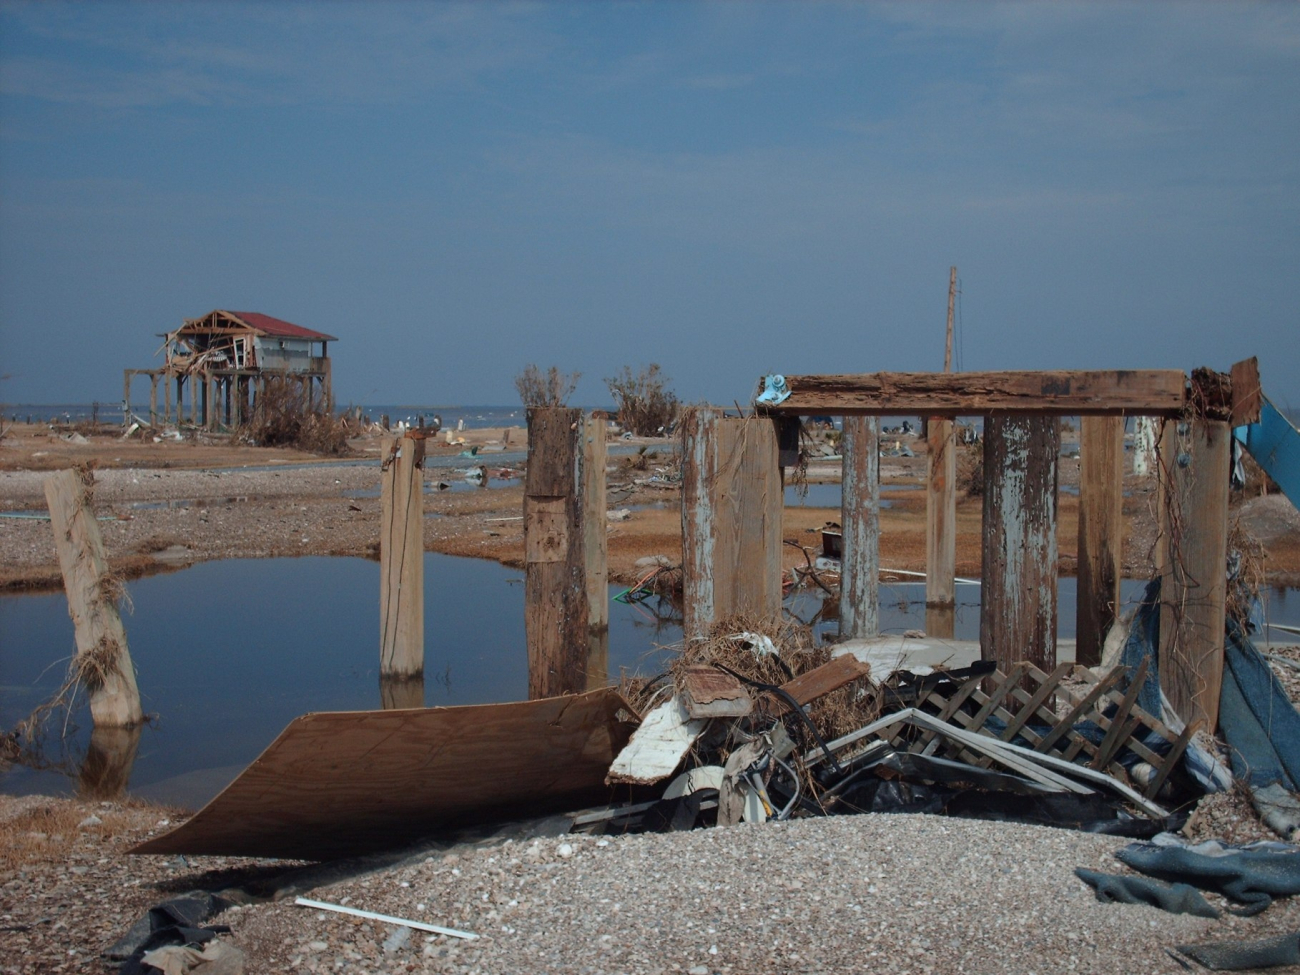 Storm surge damage caused by Hurricane Ike